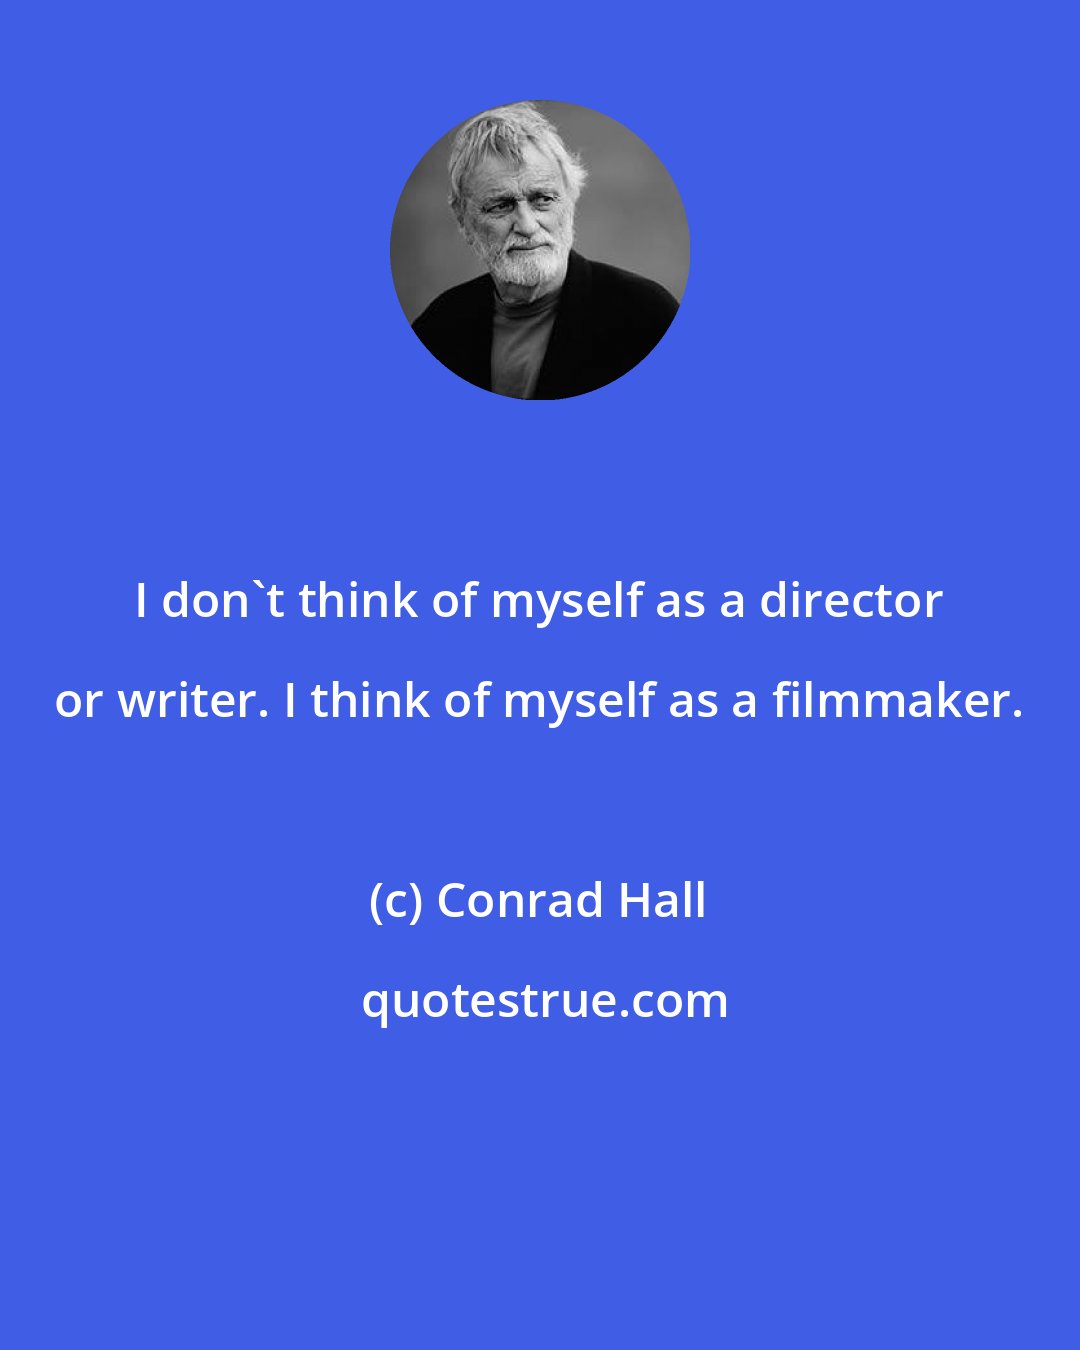 Conrad Hall: I don't think of myself as a director or writer. I think of myself as a filmmaker.